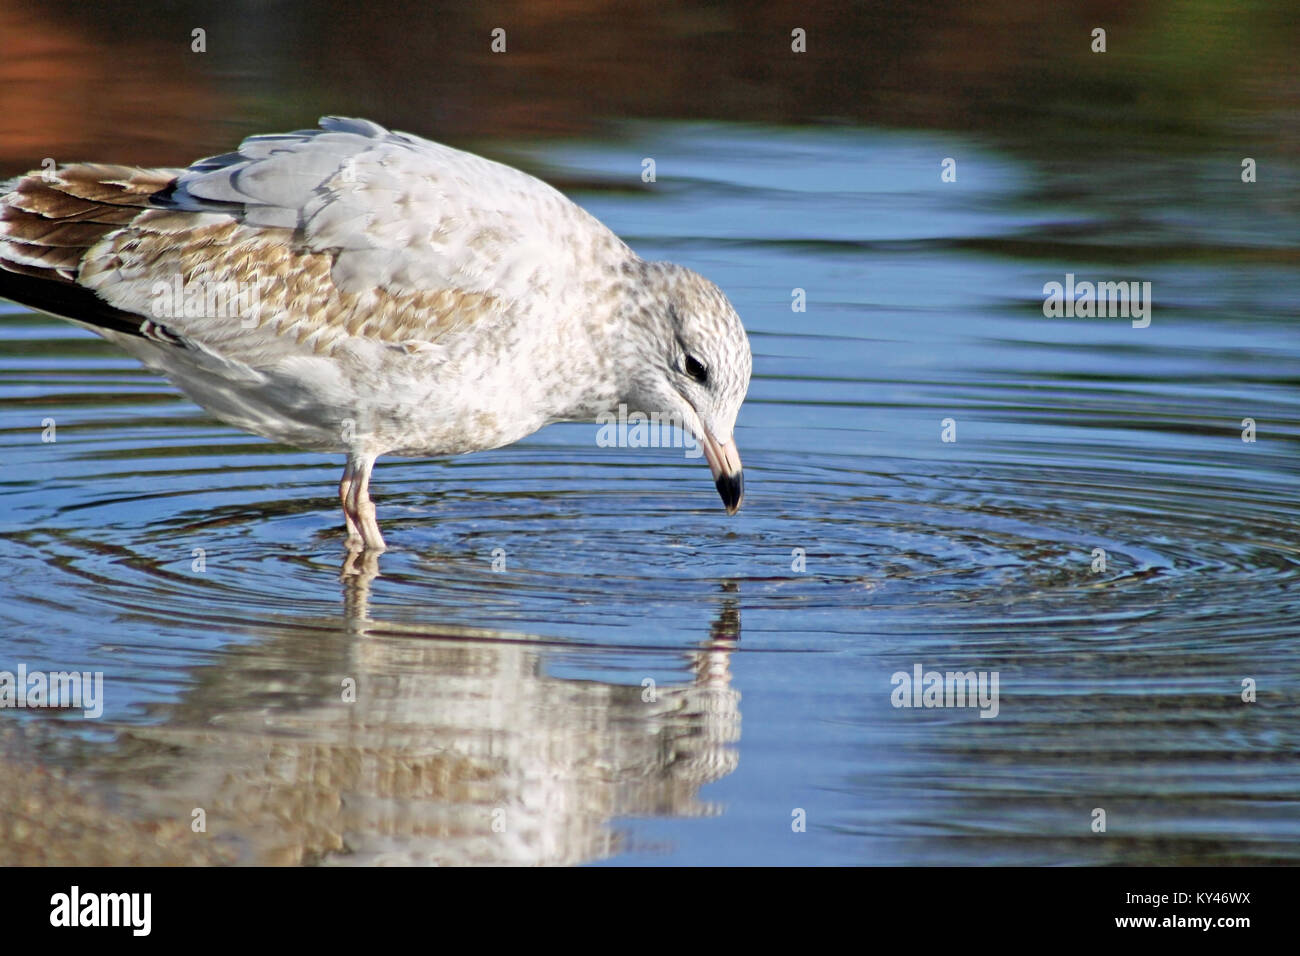 Seagull looking at his reflection in beautiful rippling blue waters Stock Photo